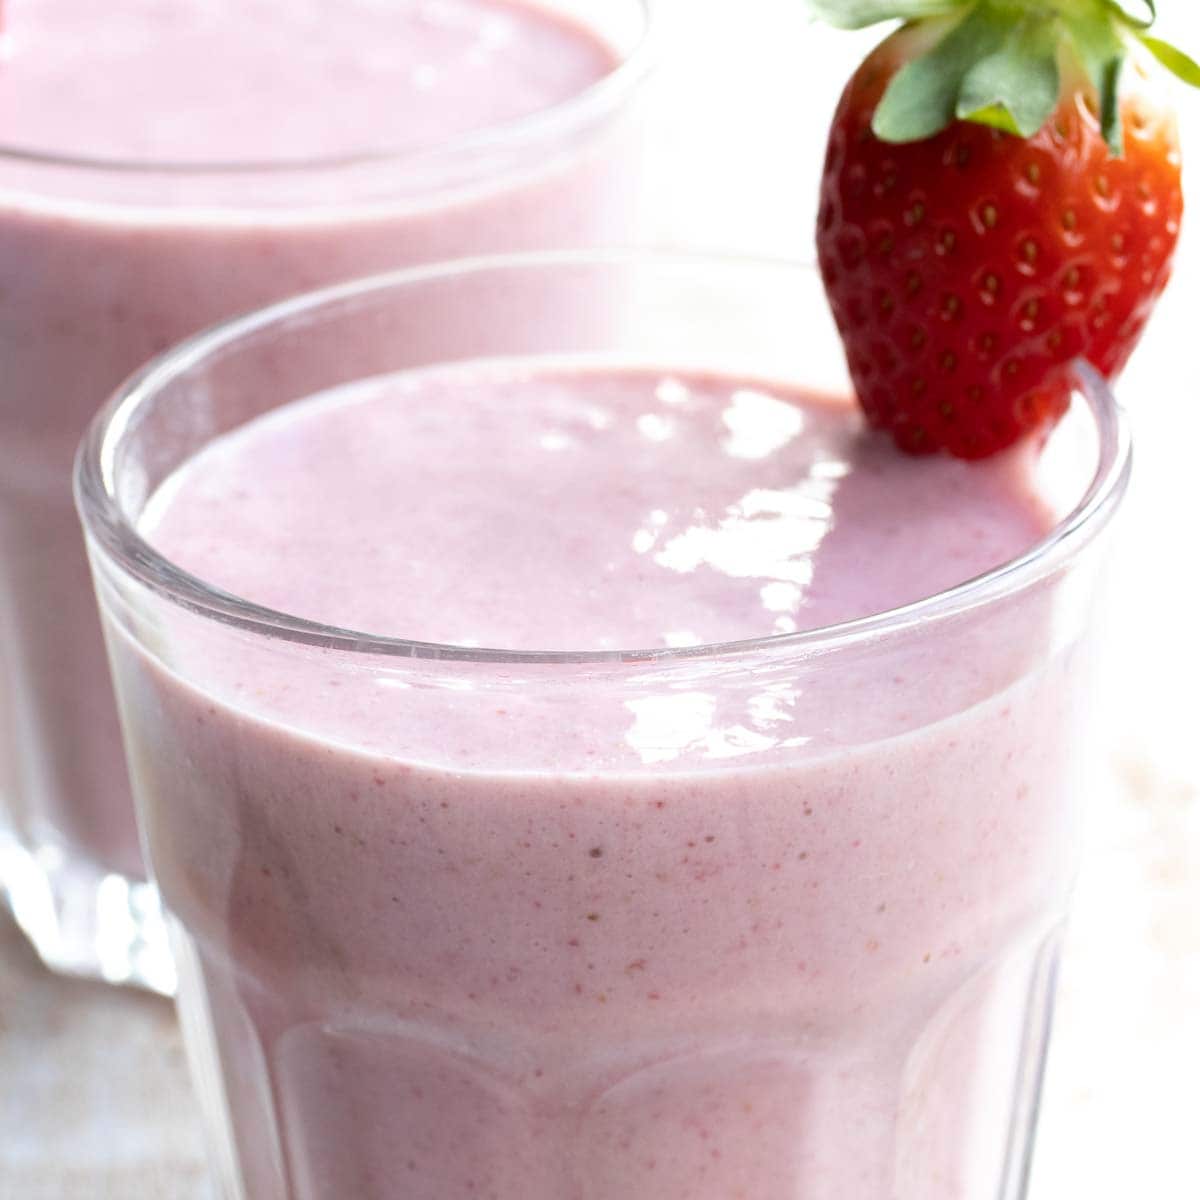 keto strawberry smoothie in a glass